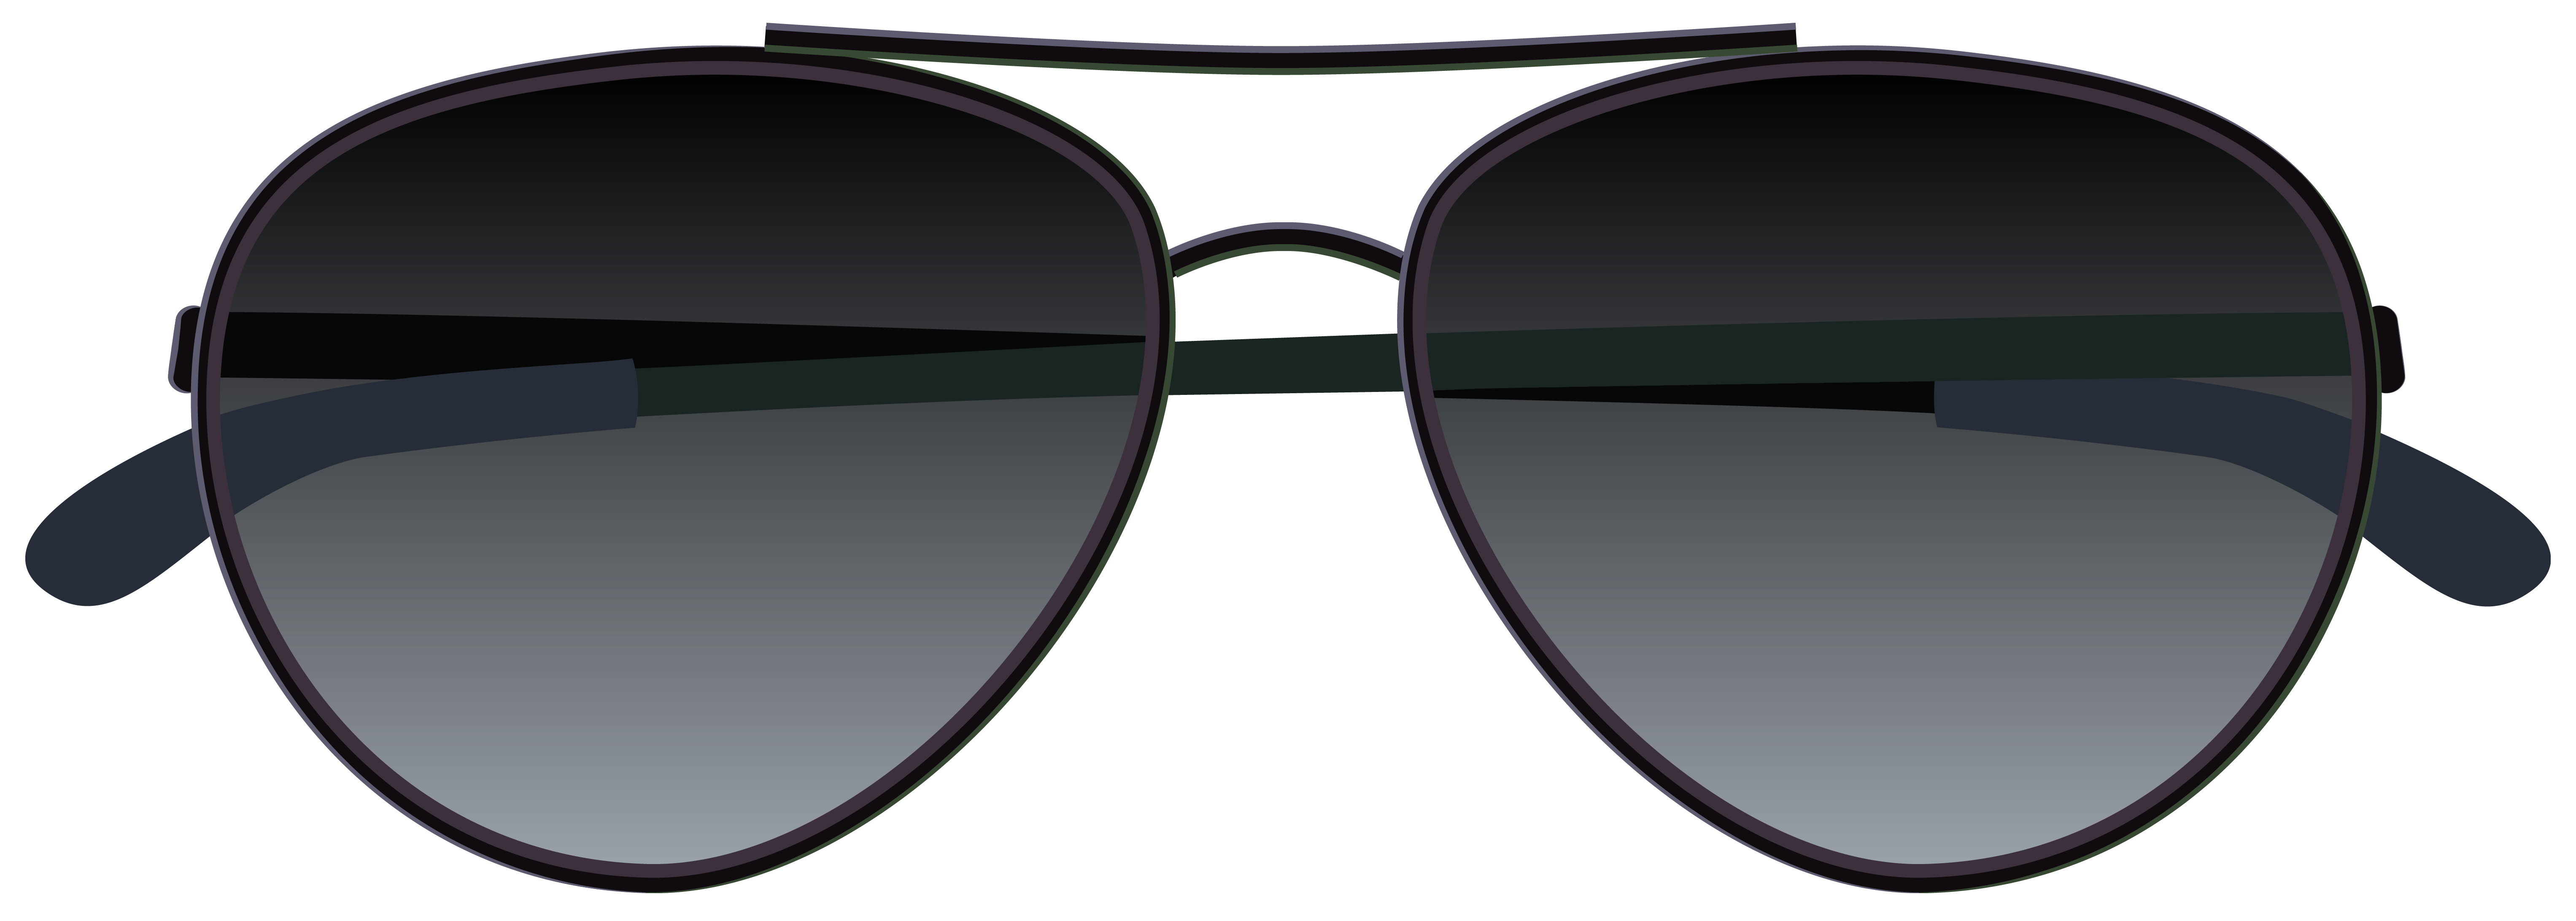 Sunglasses Image Png Clipart